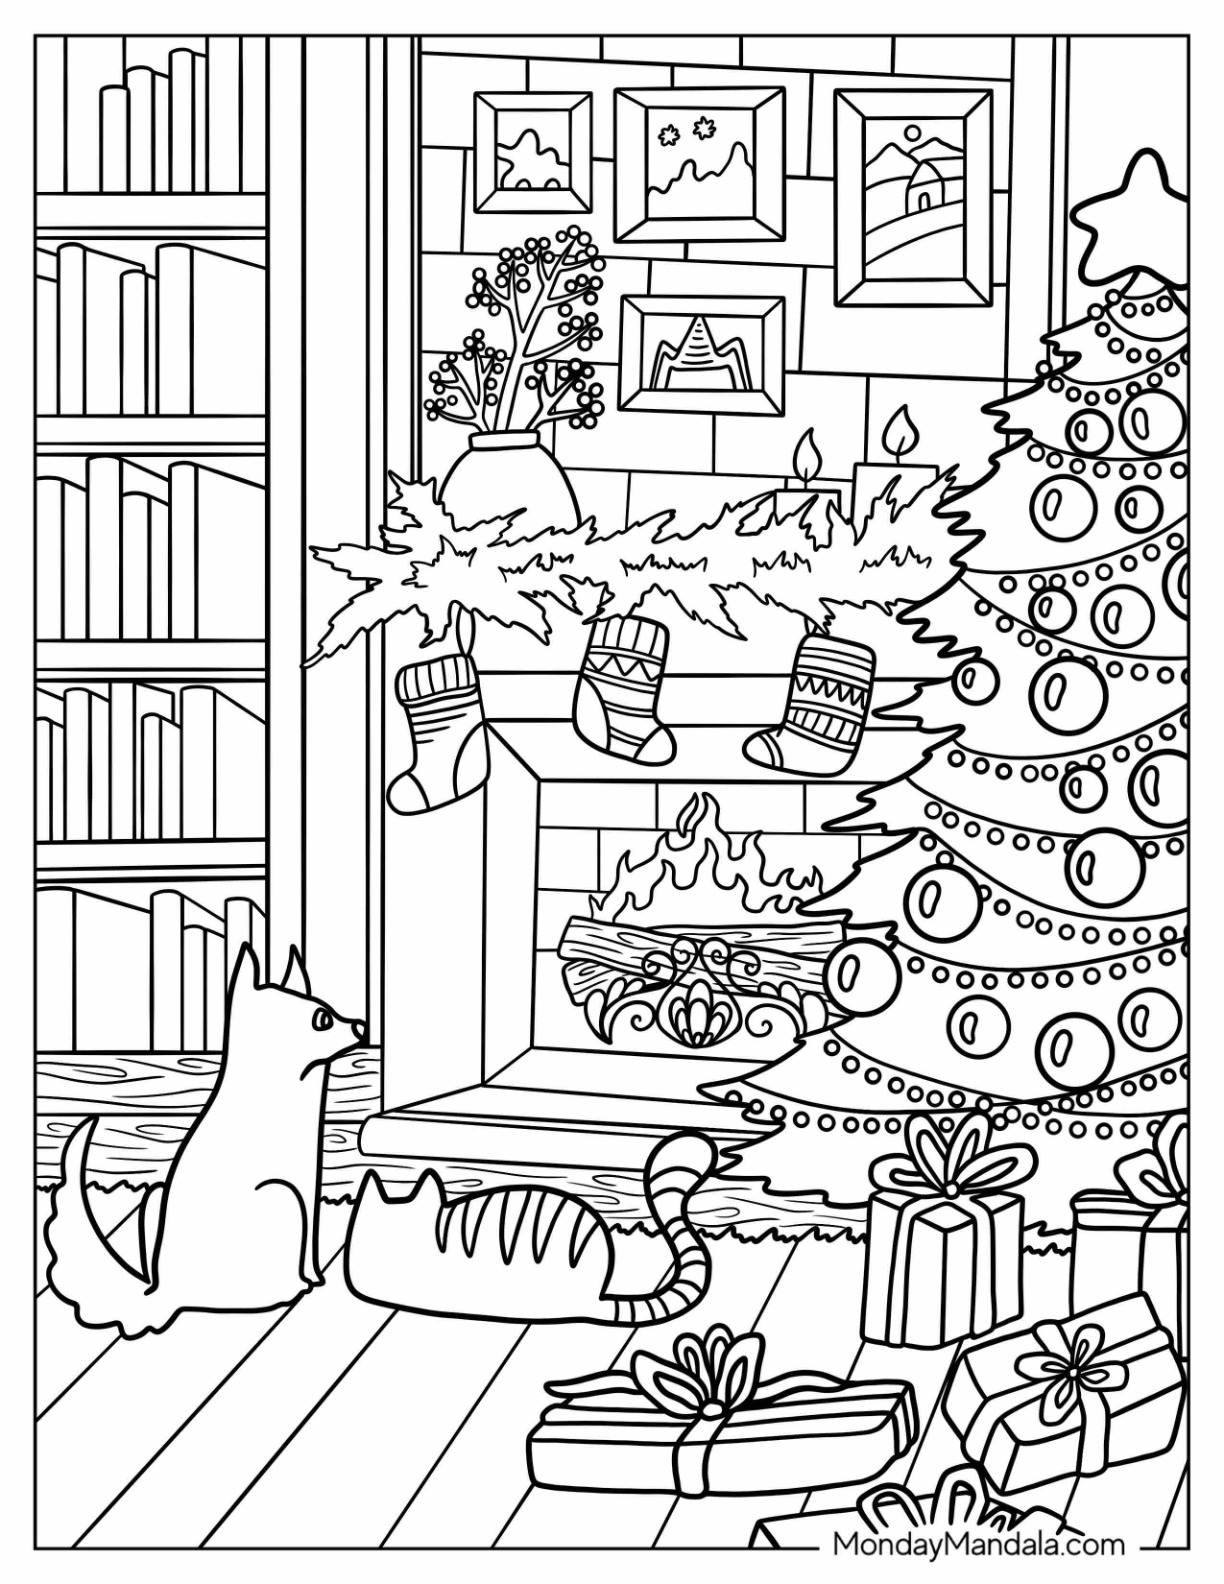 Christmas coloring pages for adults free printables